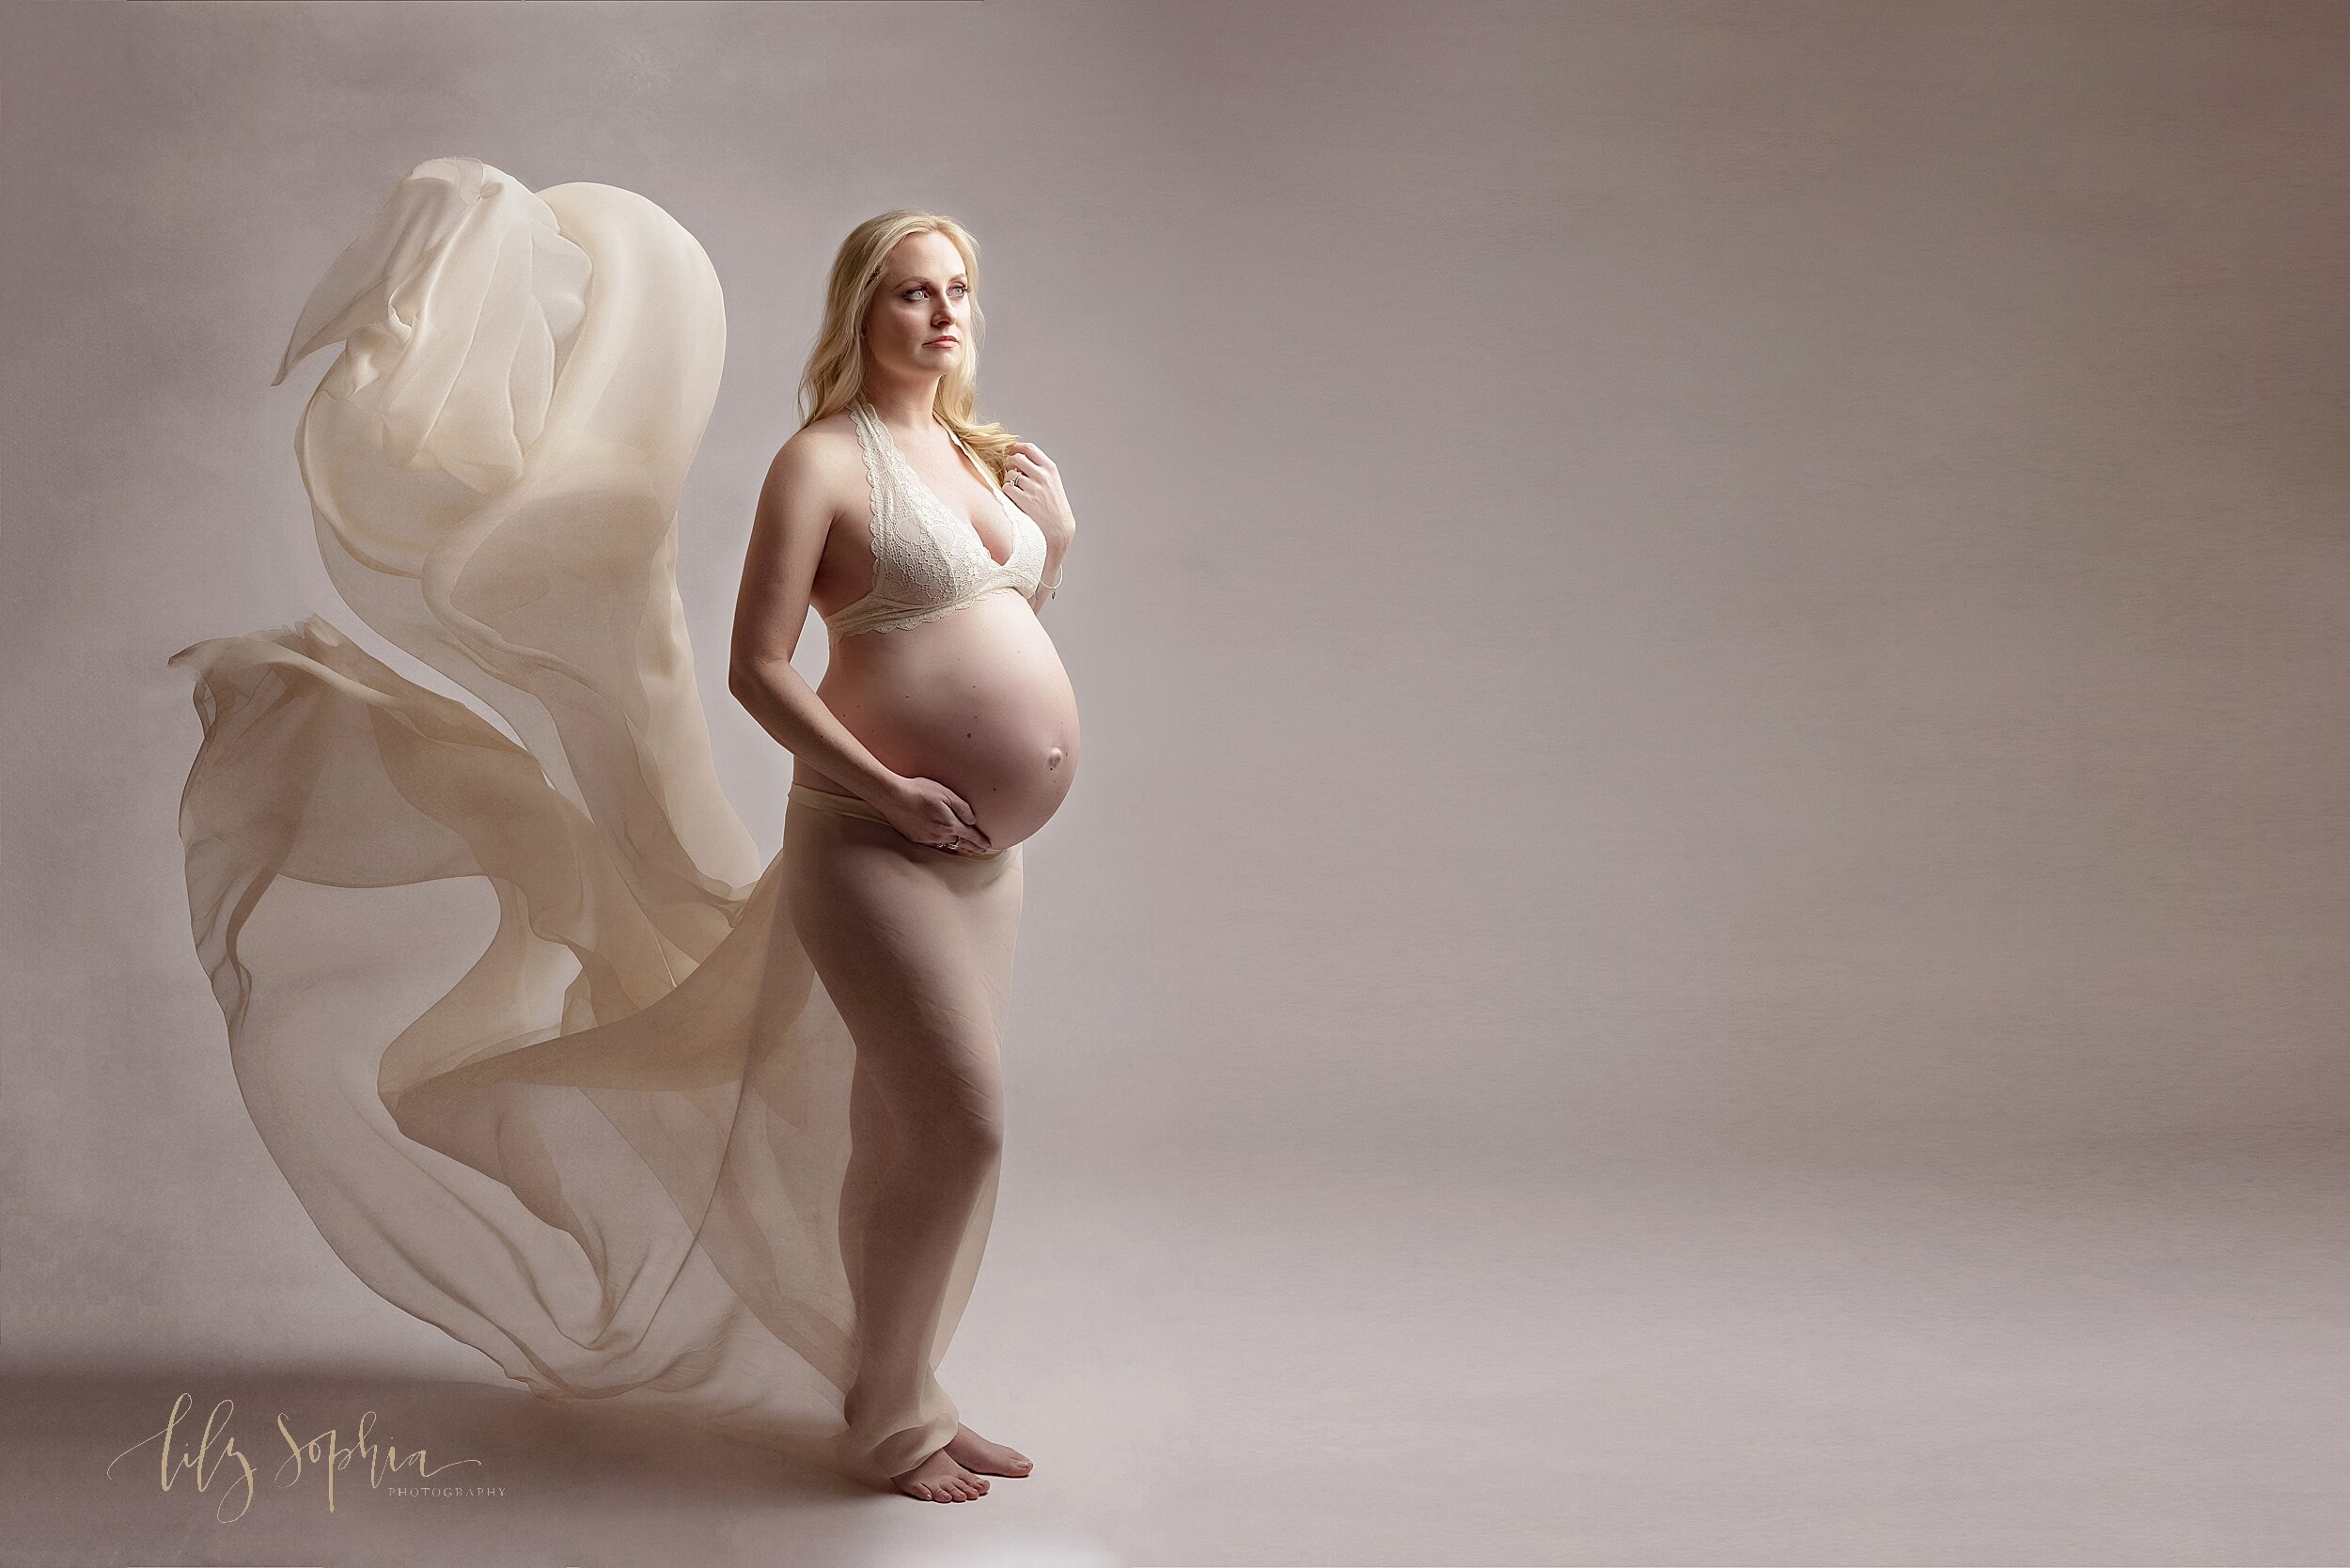  Fine art maternity portrait of blonde pregnant woman in the Atlanta studio of Lily Sophia photography wearing an ivory lace bra with tossed floating chiffon fabric behind her. 